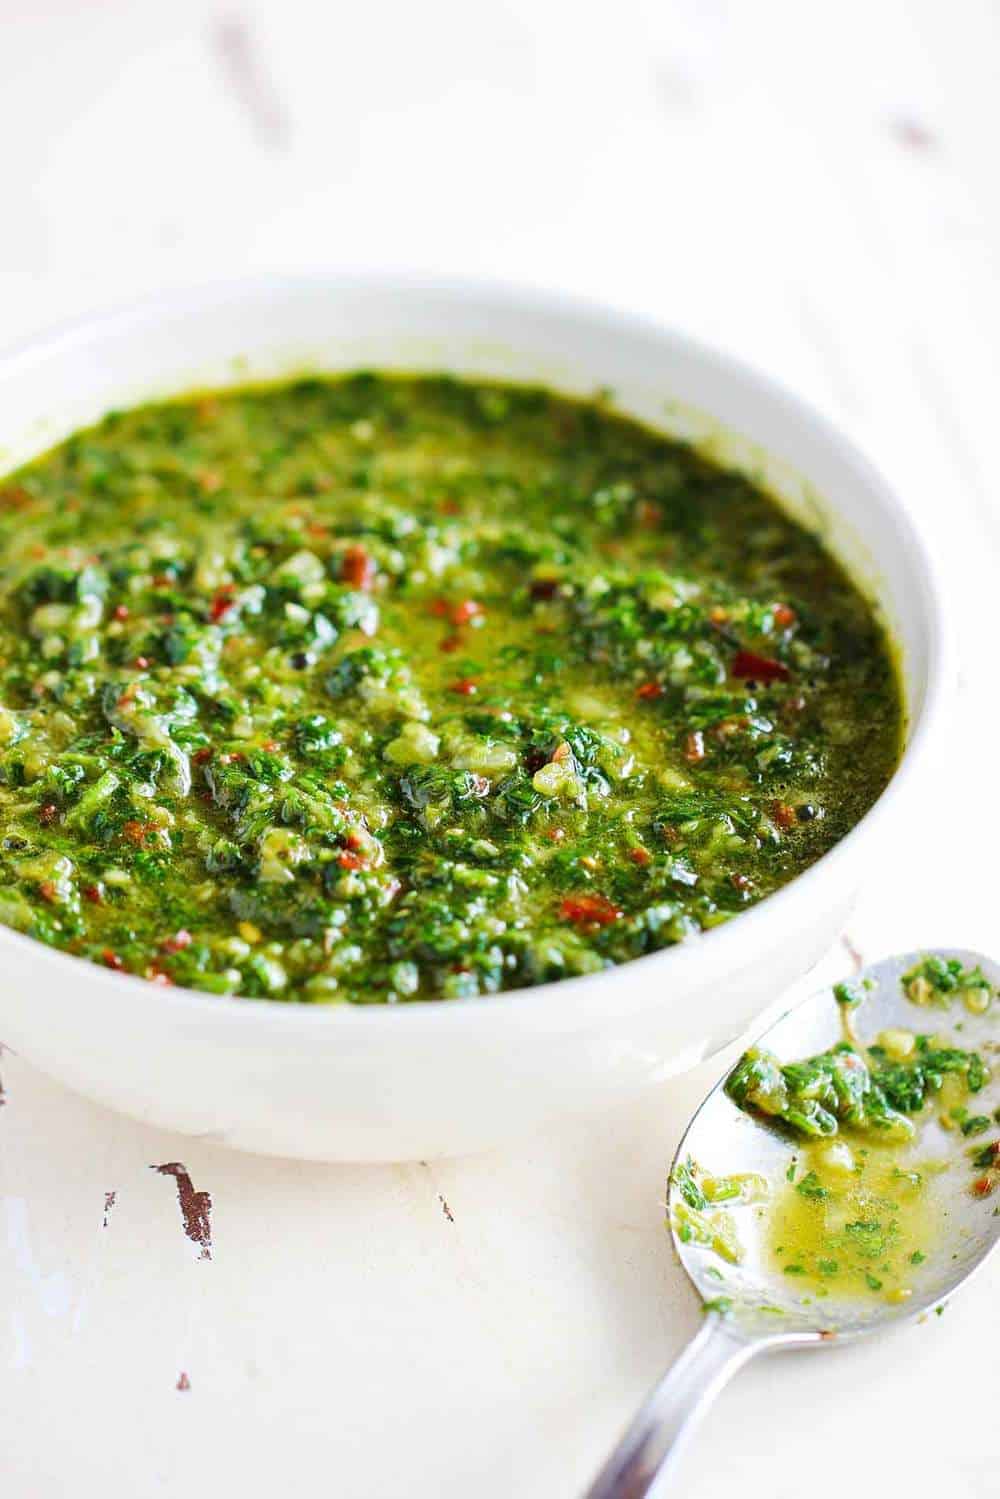 The best chimichurri sauce is perfect on grilled steak